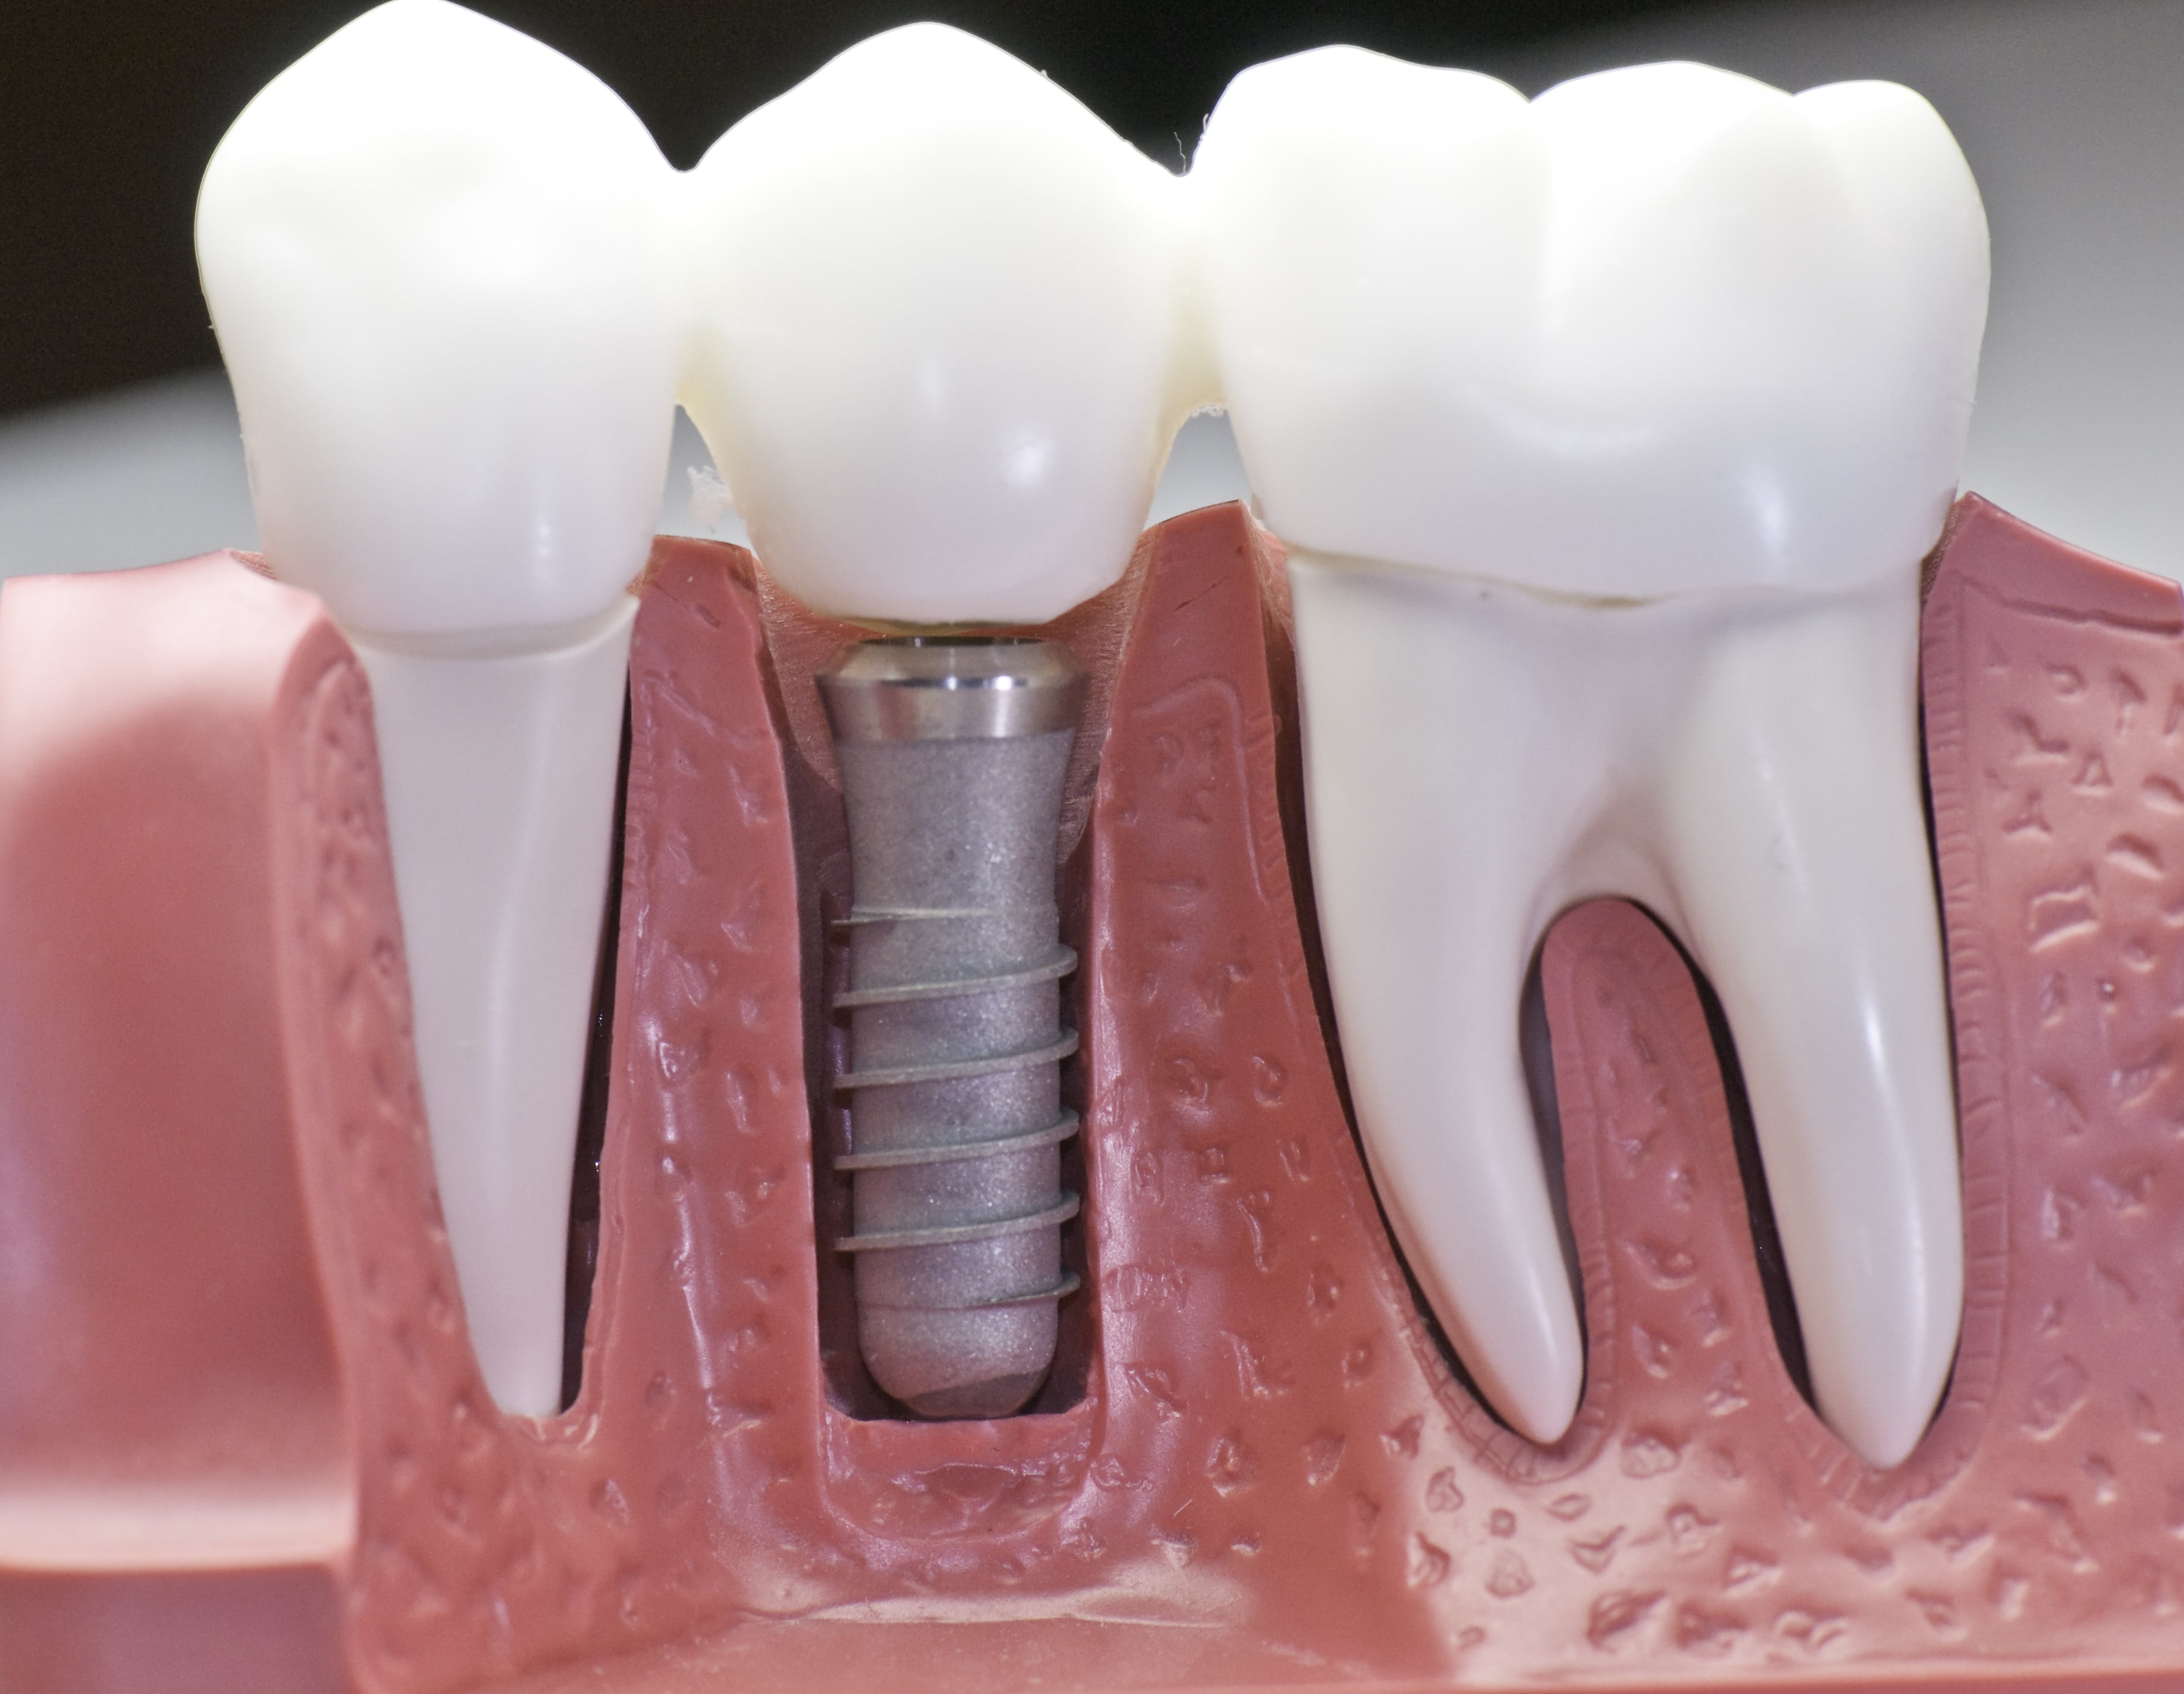 Dental Implants Treatment Experts Share Vital Information About Implant